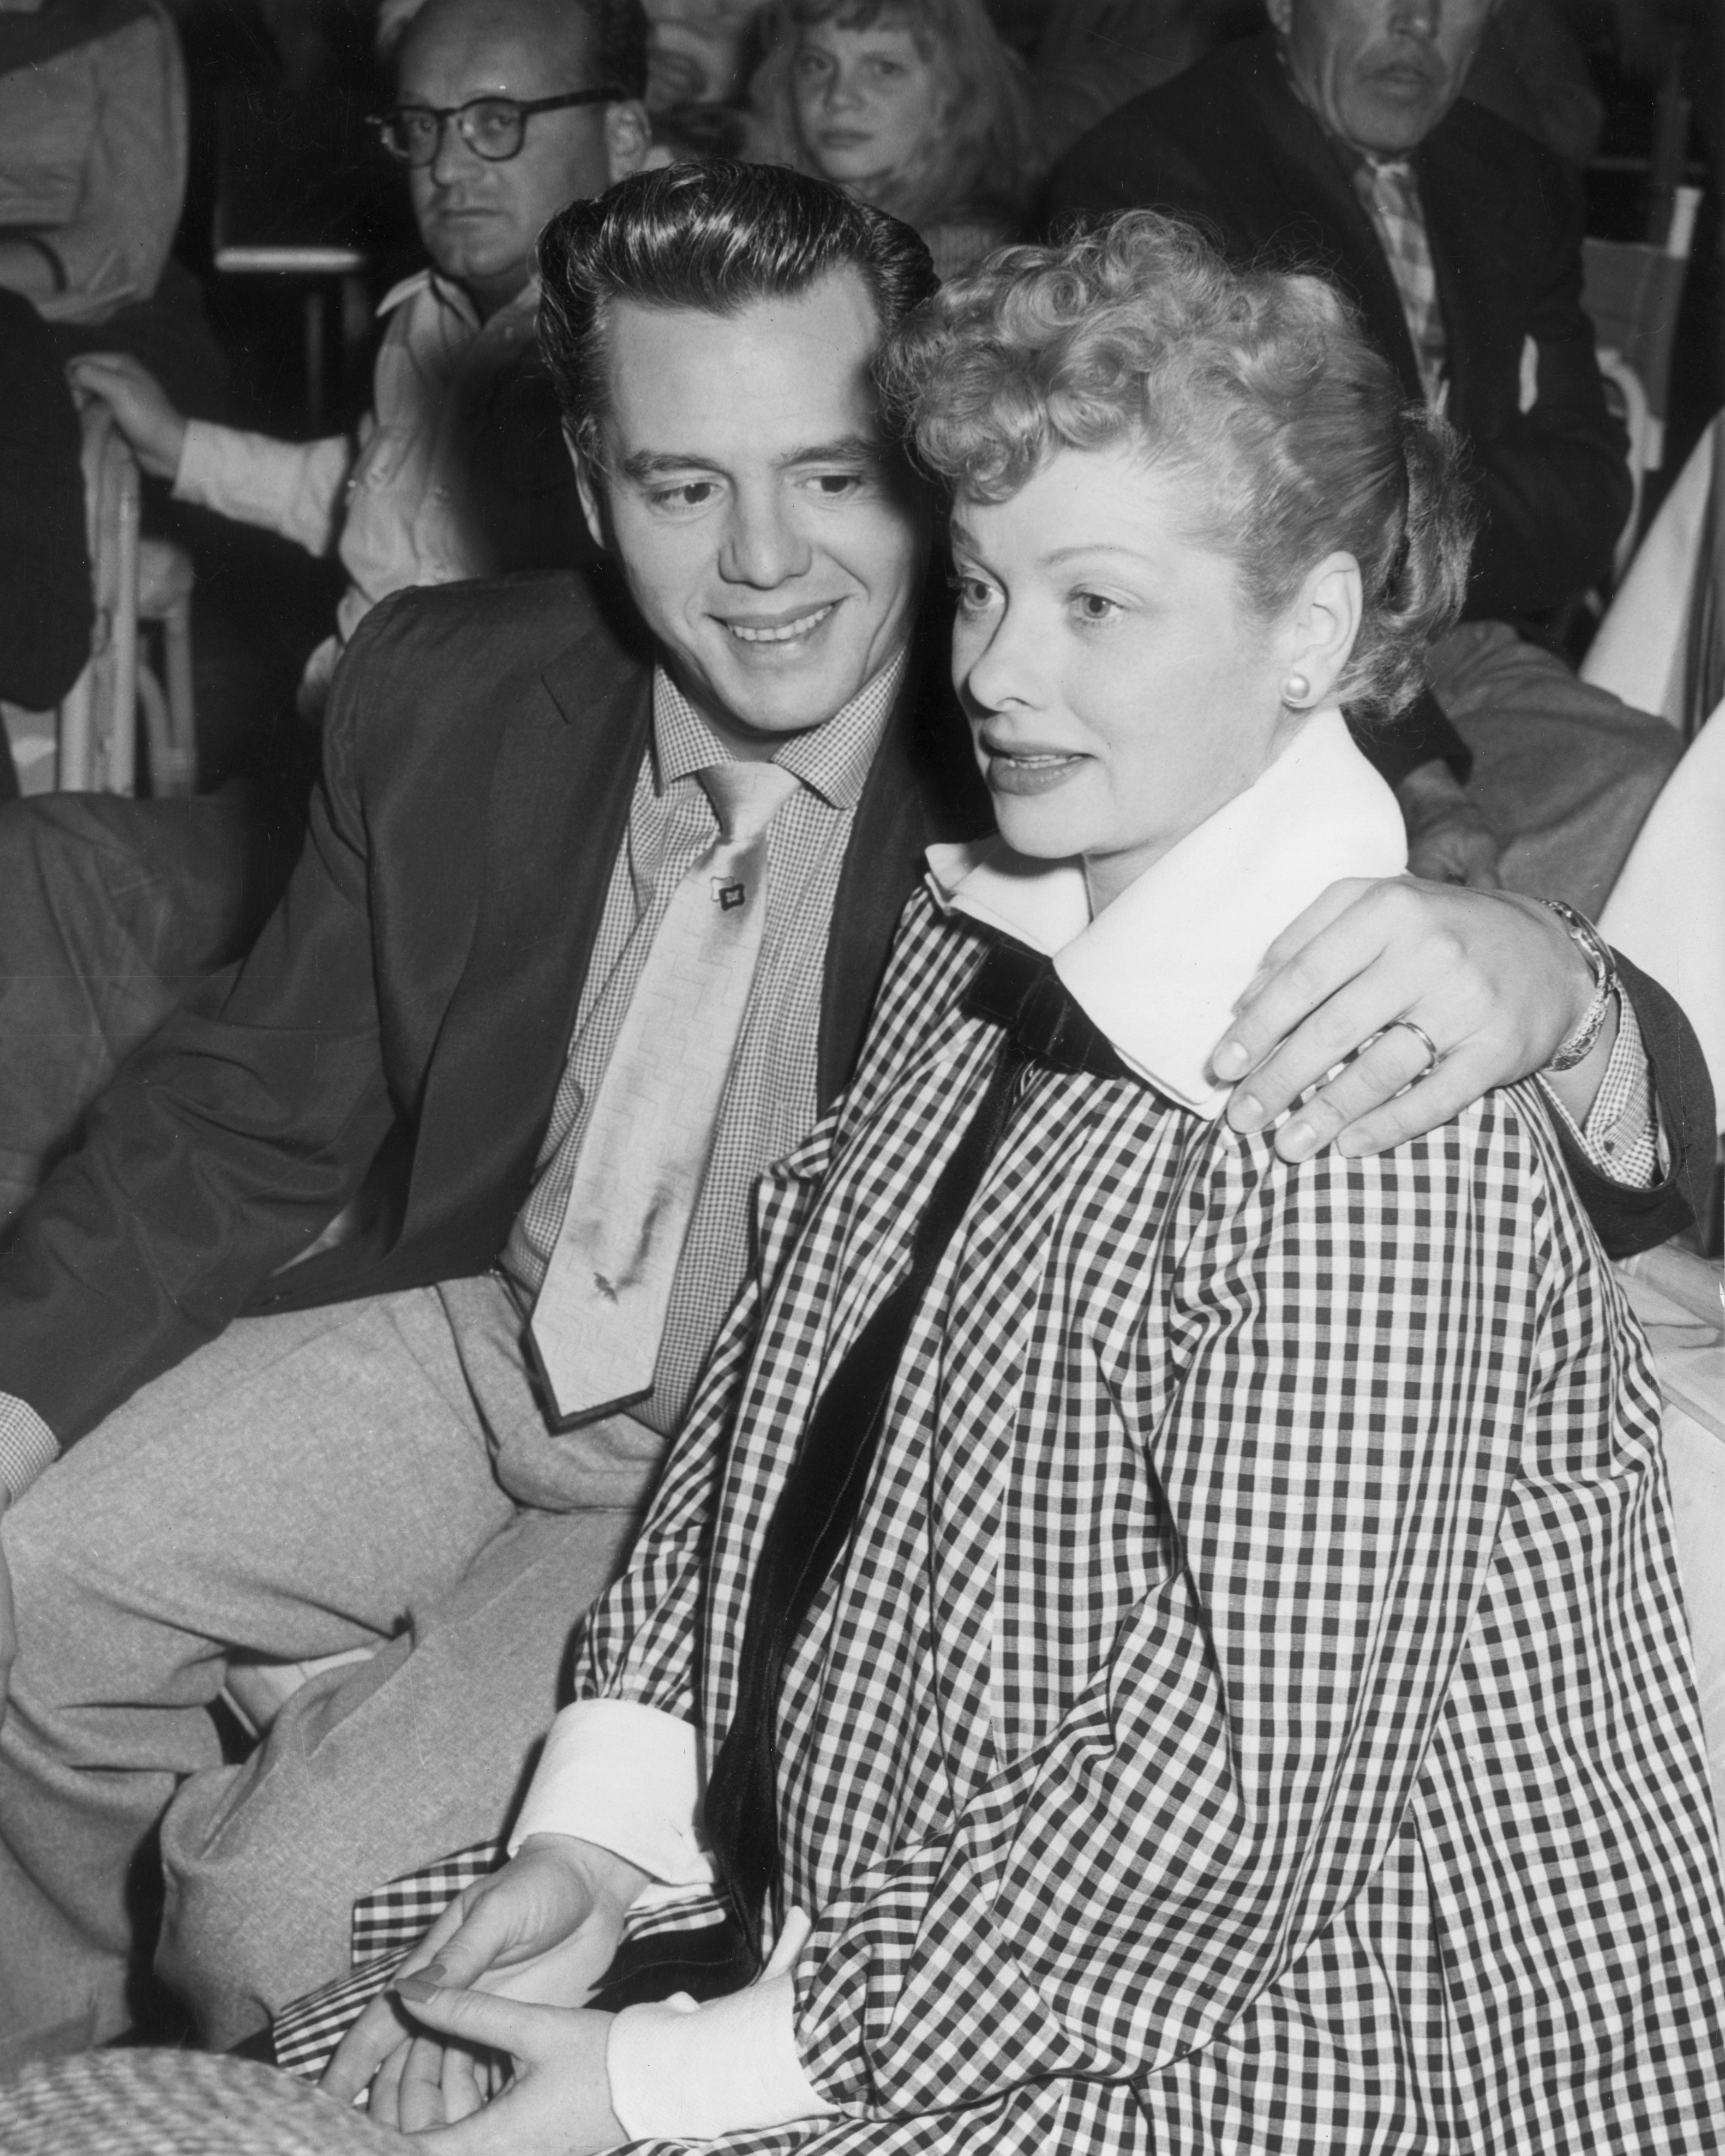 Desi Arnaz hugging his wife, Lucille Ball, while watching a soccer match at the Racquet Club in Palm Springs, California, about 1953 |  Photo: Getty Images